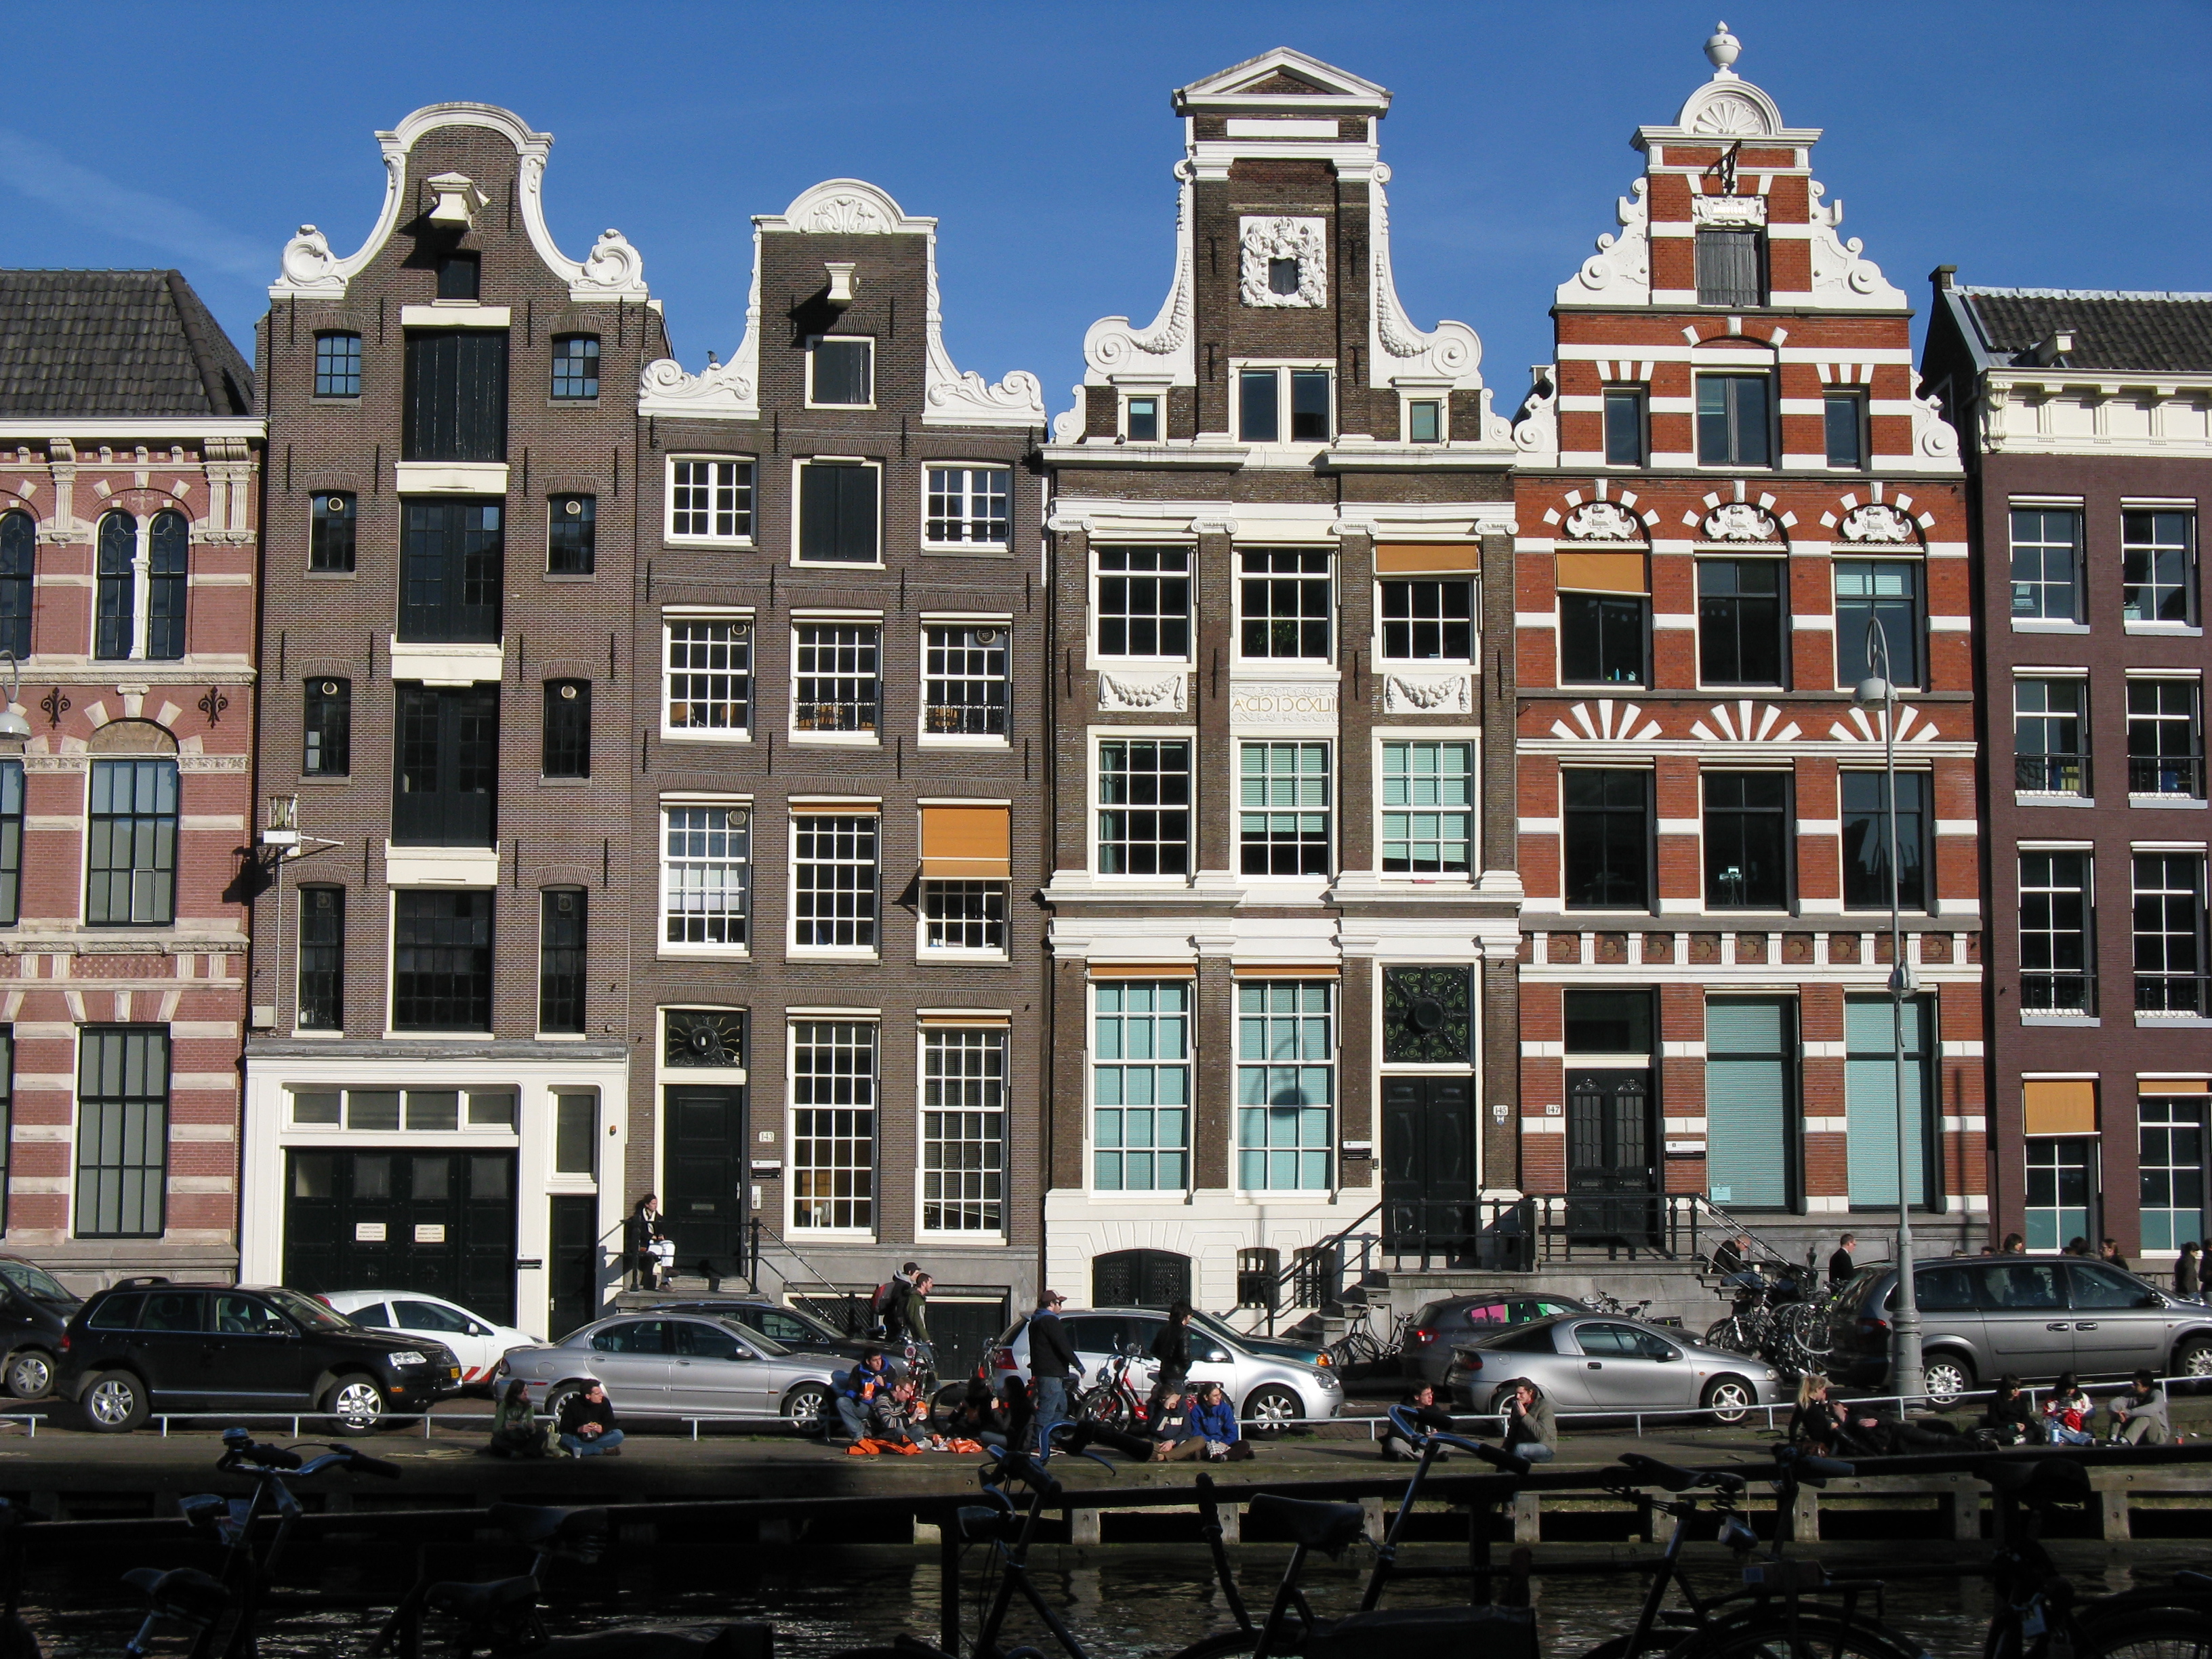 Typical Amsterdam house